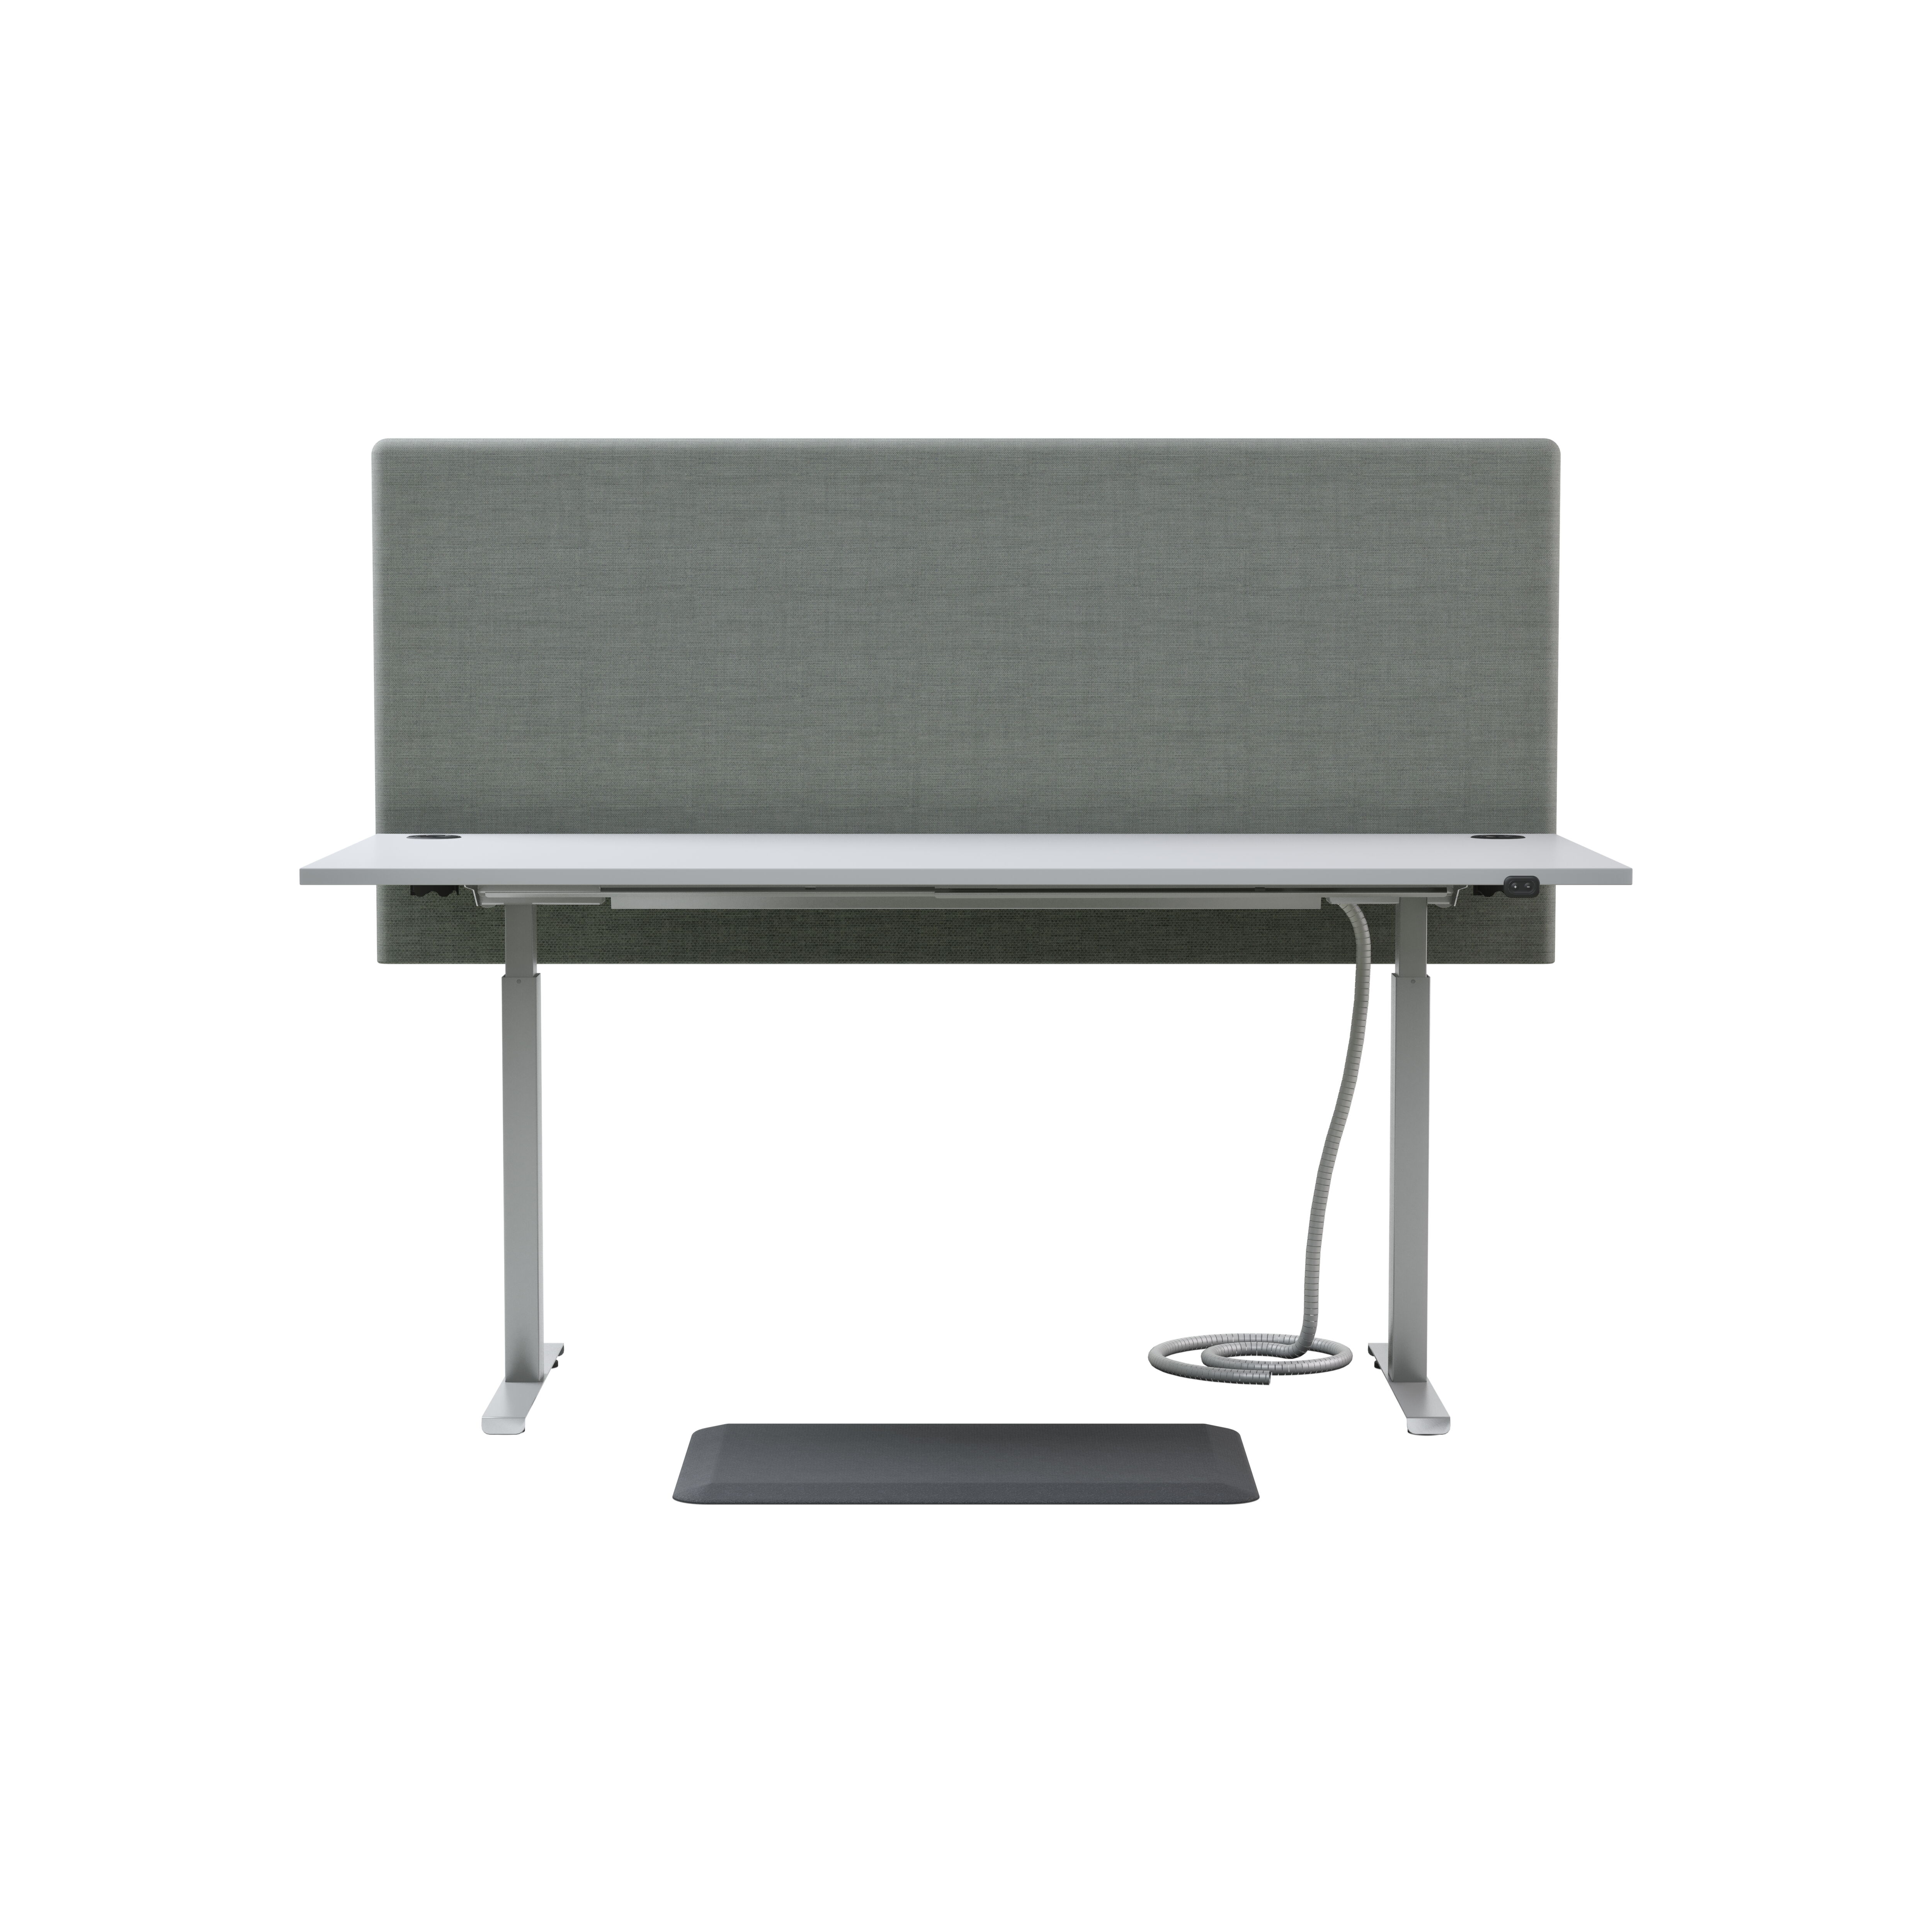 Neet Desk, sit/stand product image 5